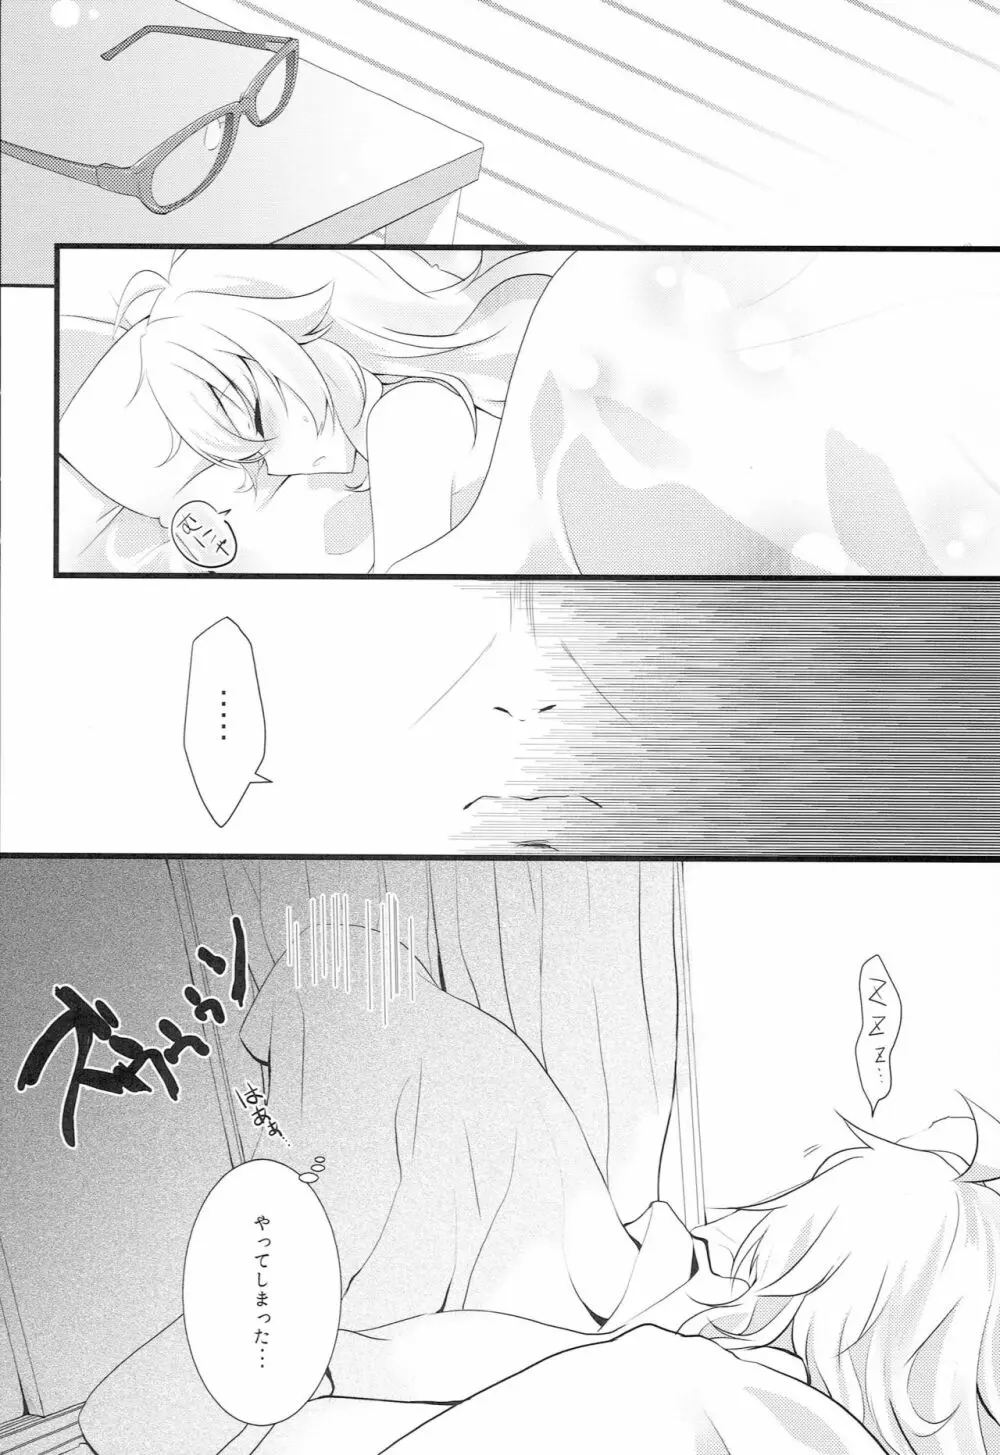 WAKE ME UP WITH A KISS - page19